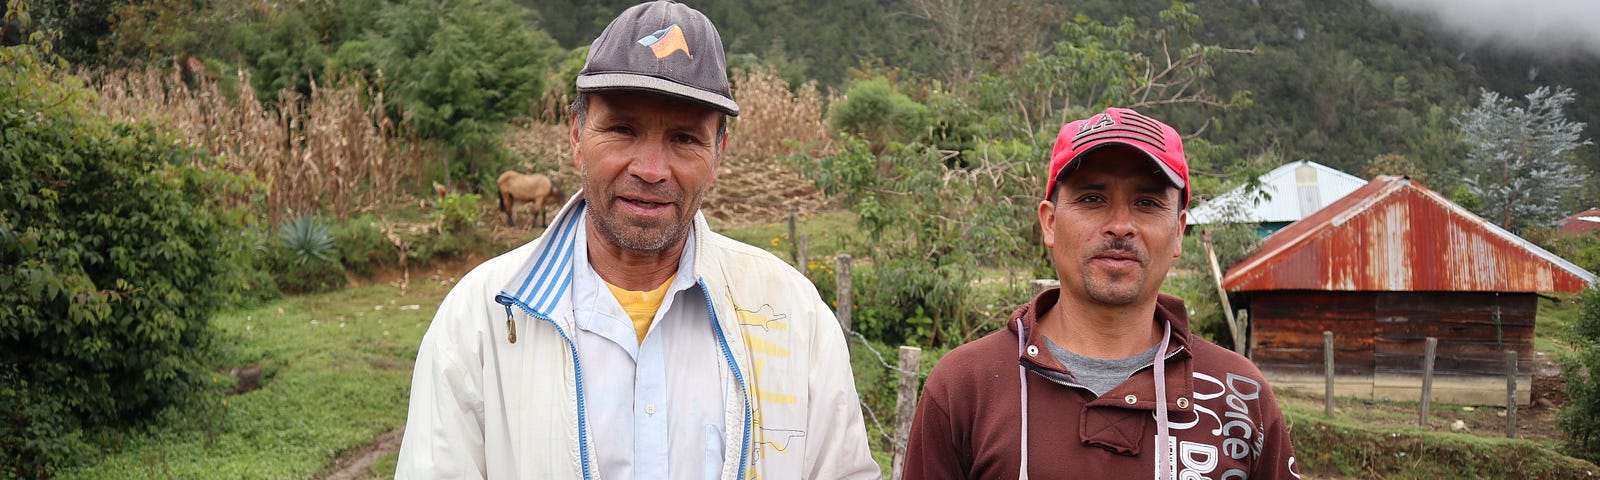 An image of two men in a rural location in Guatemala. They are standing in the foreground. In the background are some buildings in cleared areas among the vegetation. In the far background are hills partially shrouded in mist.